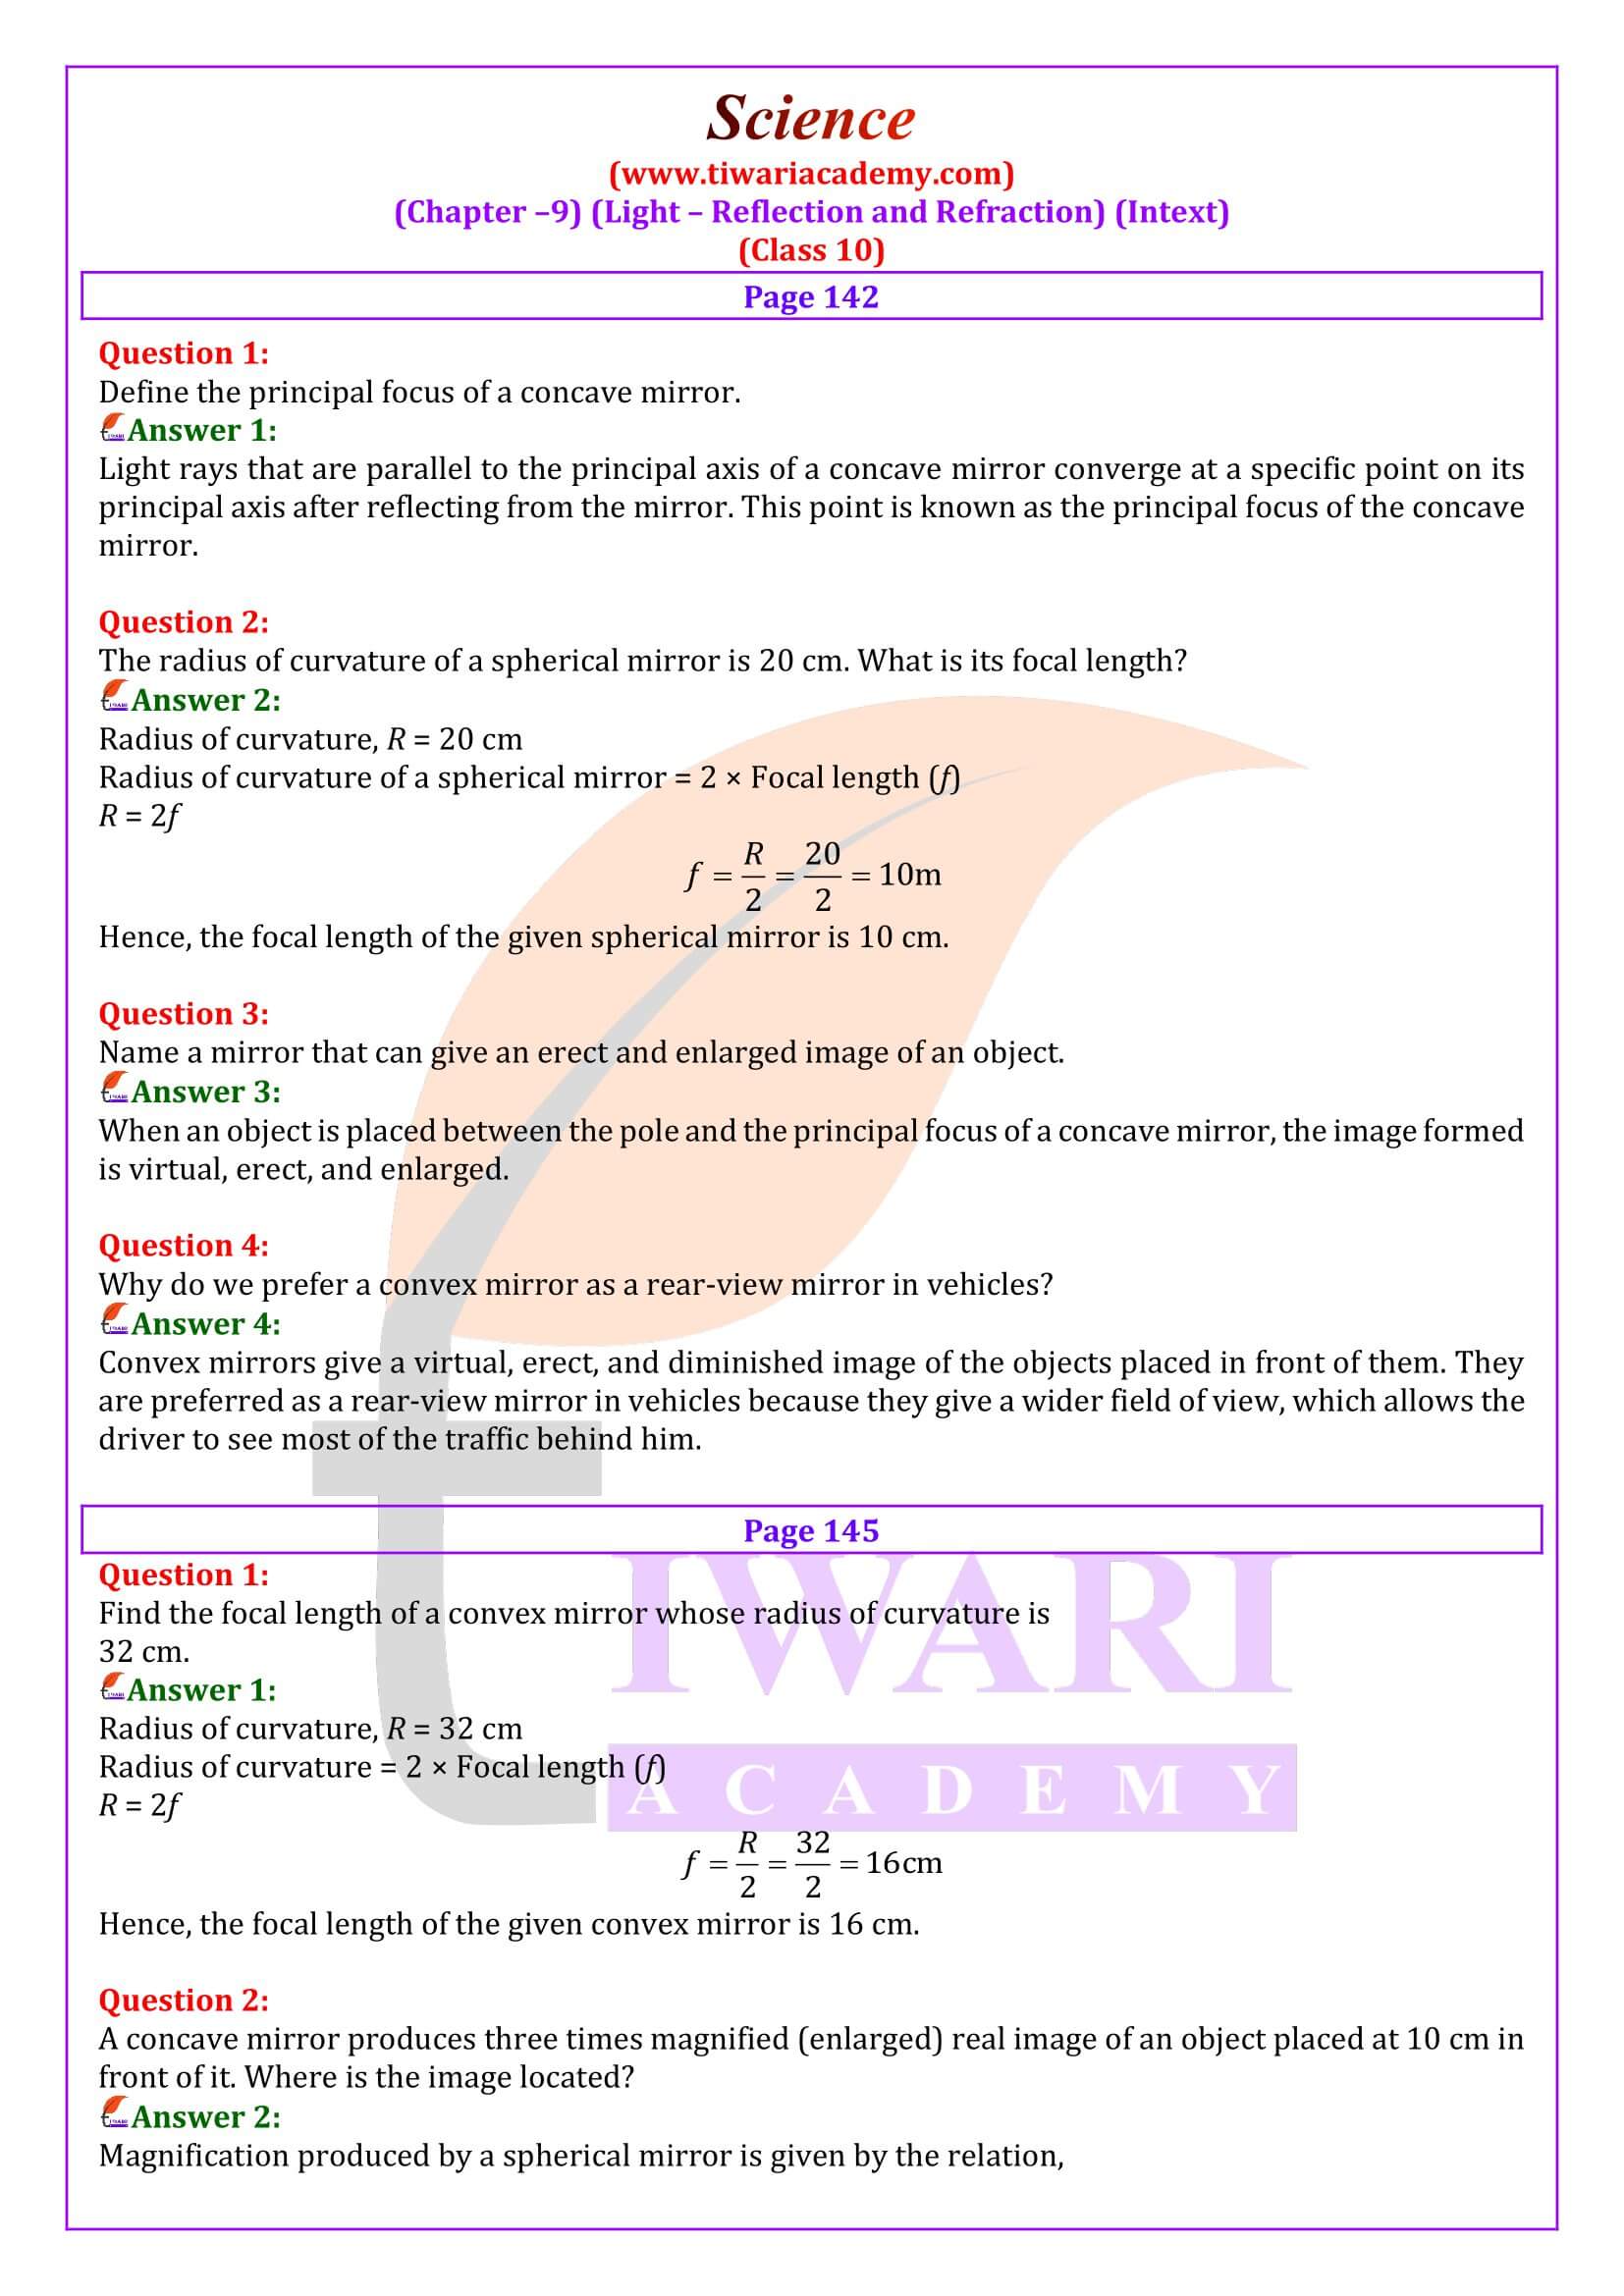 NCERT Solutions for Class 10 Science Chapter 10 Light Reflection and  Refraction